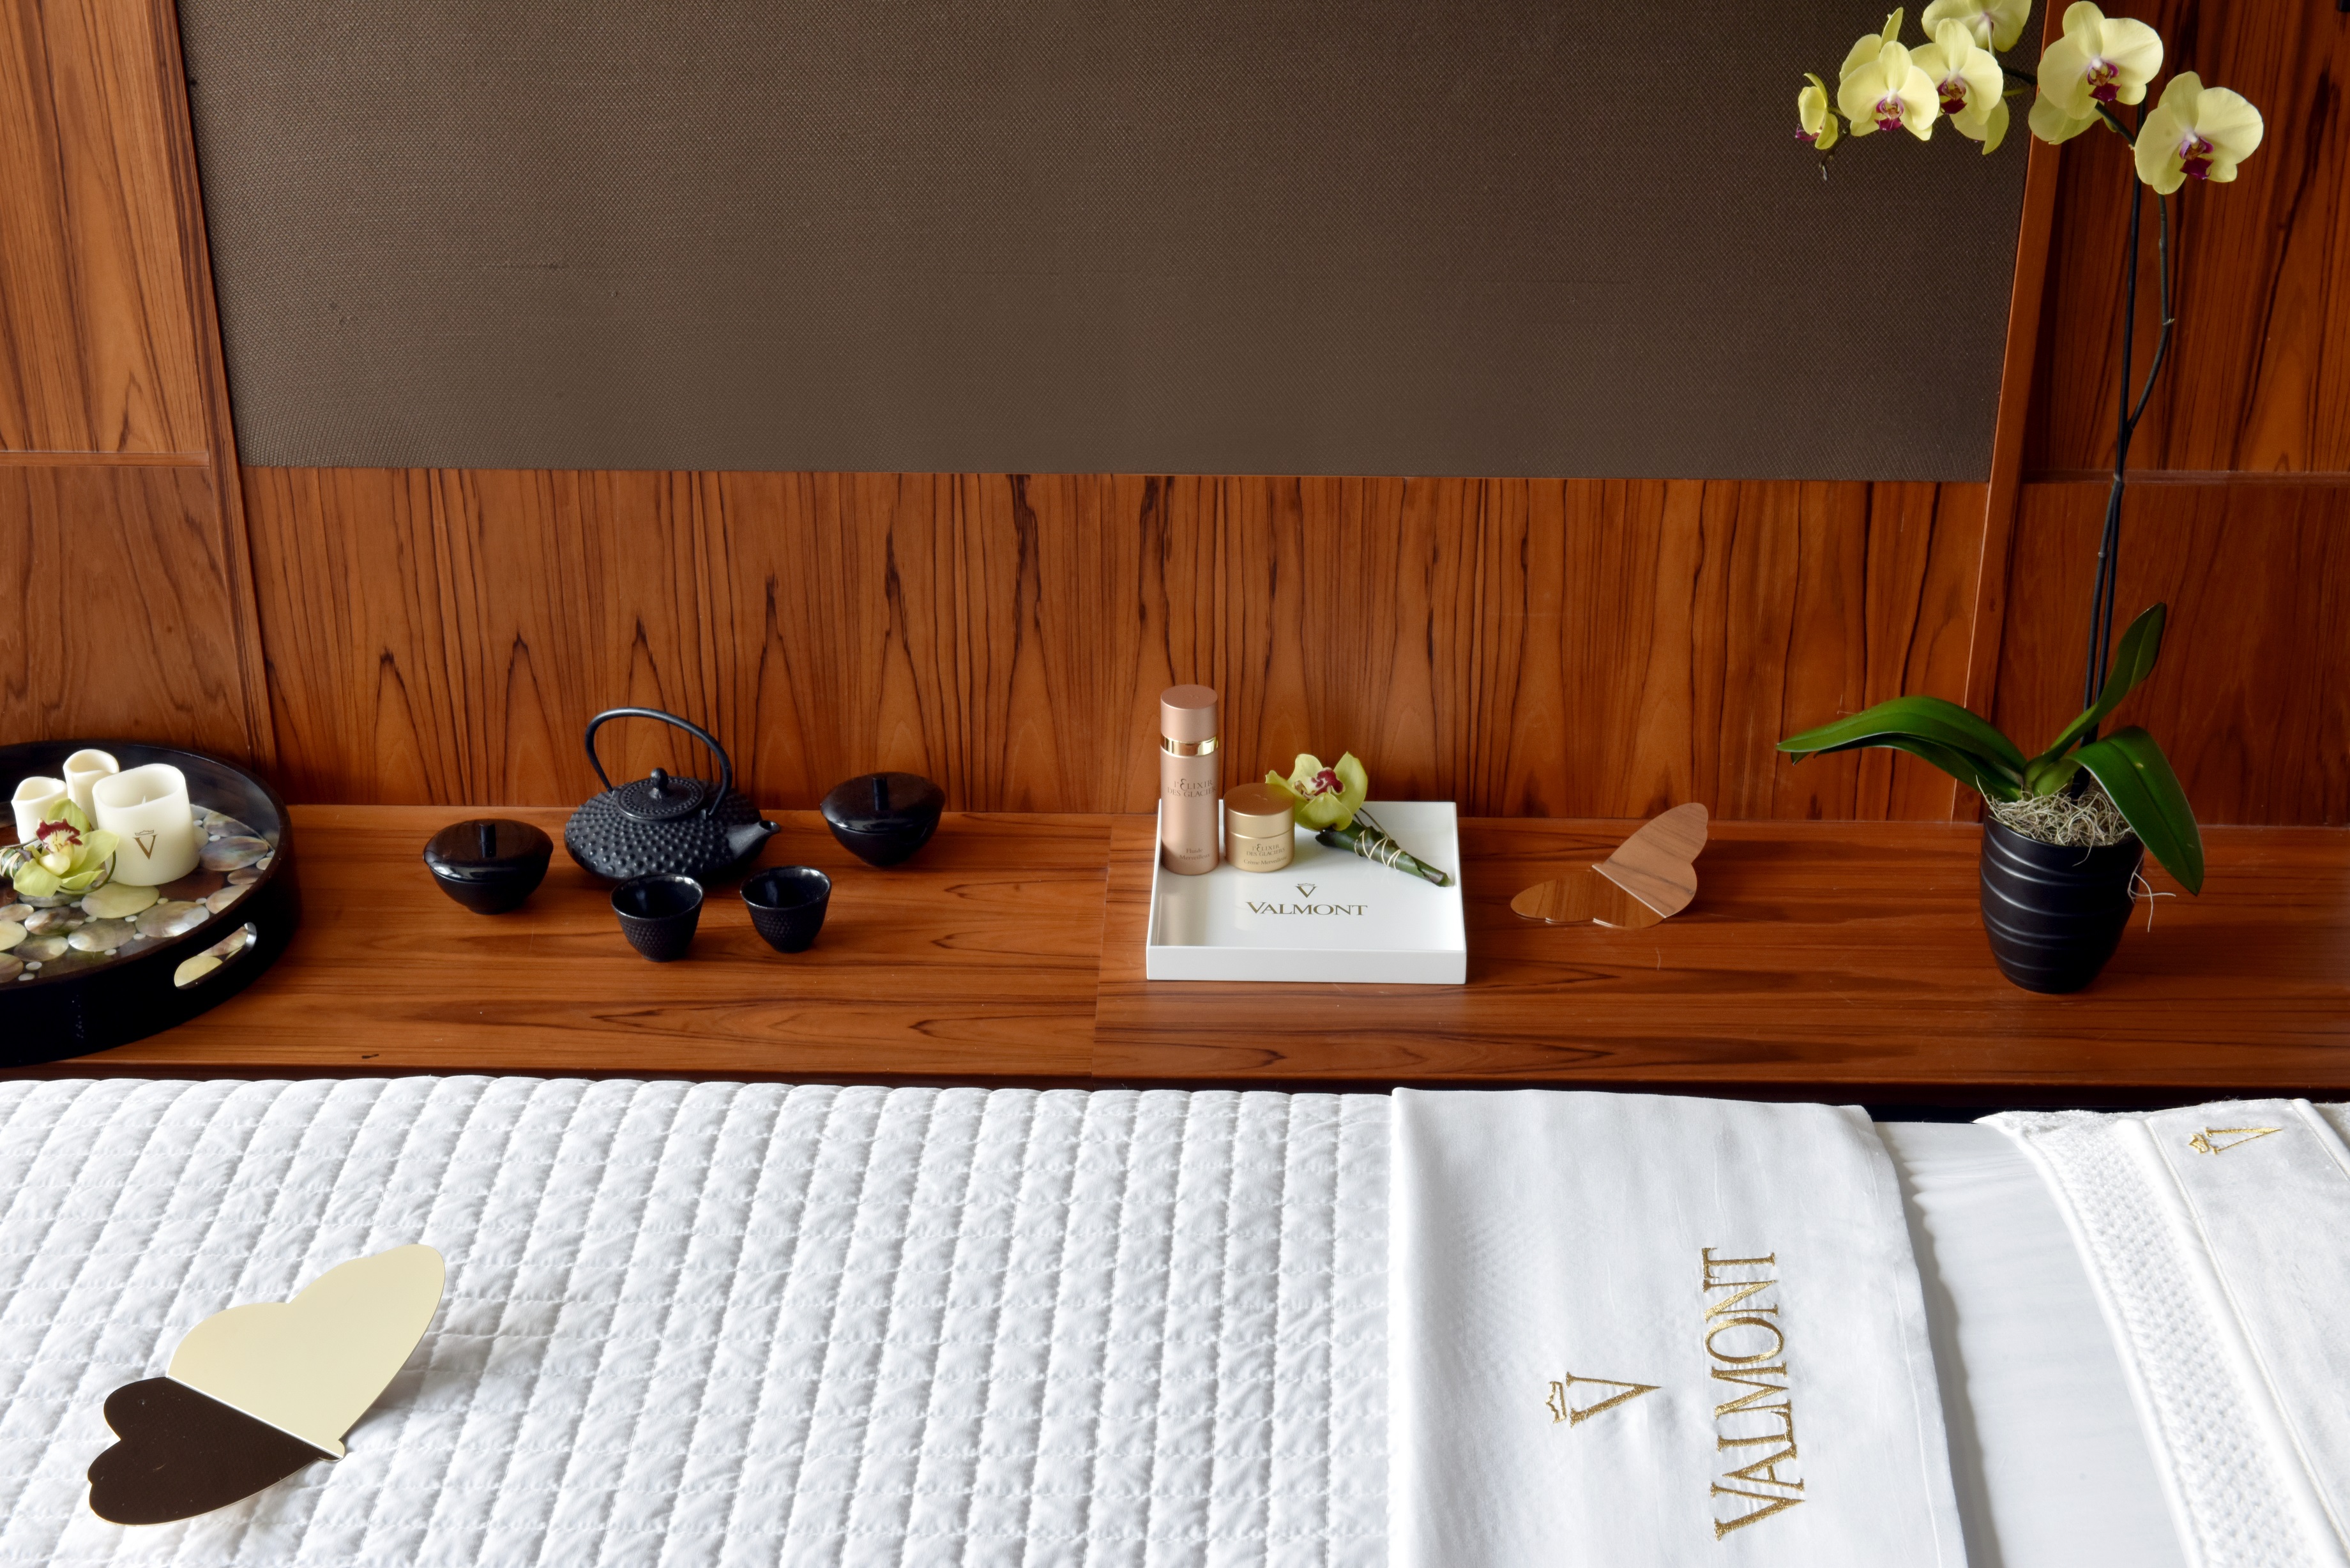 Valmont for The Spa at The Setai Miami Beach treatment room